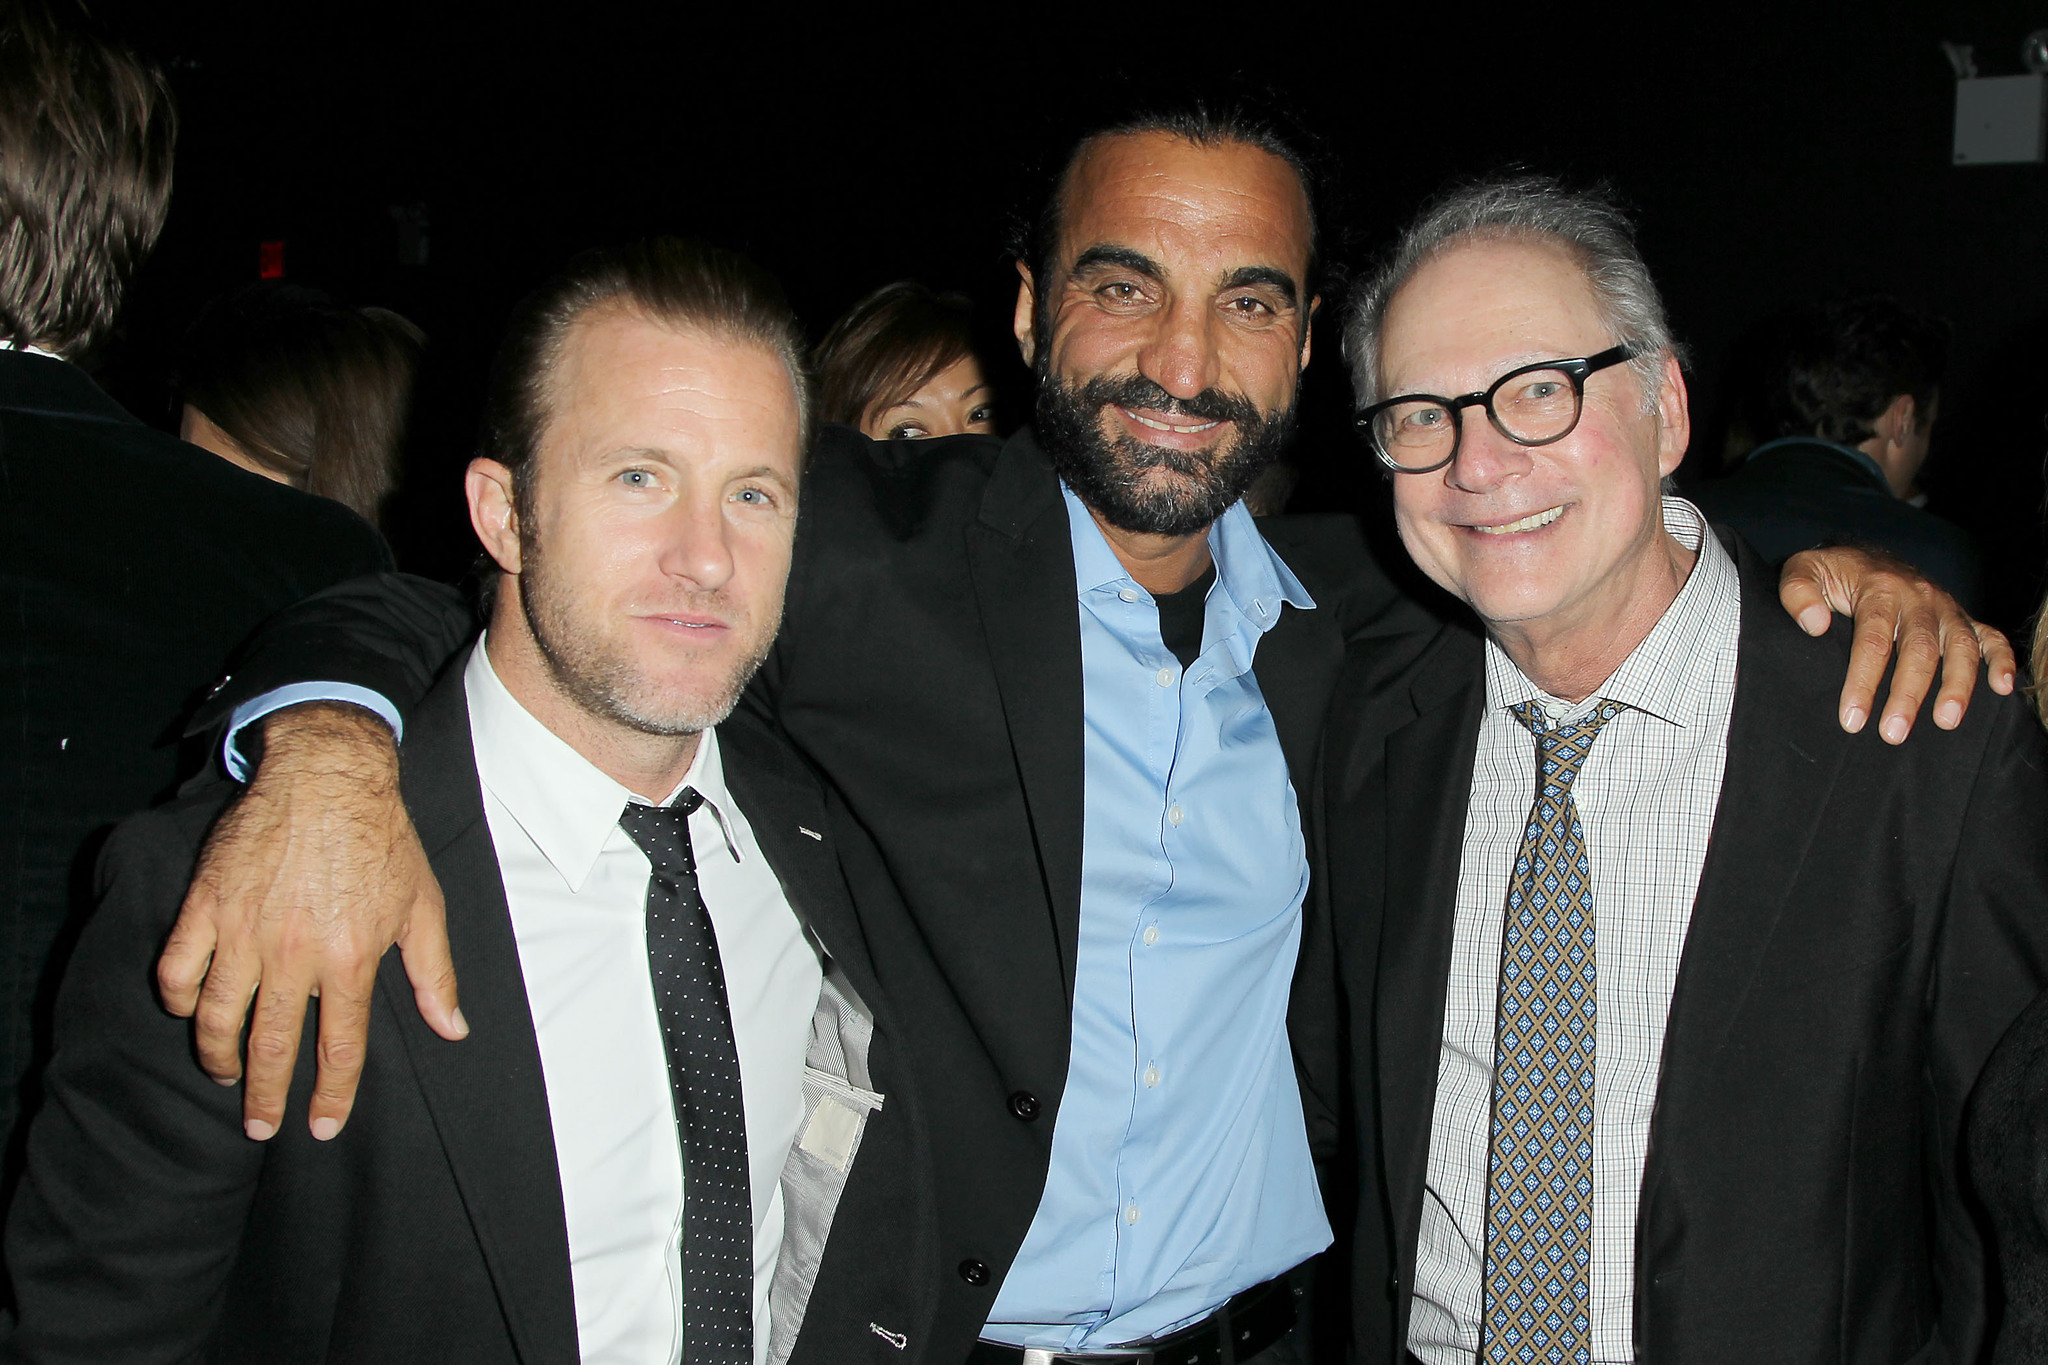 Barry Levinson, Scott Caan and Fahim Fazli at event of Rock the Kasbah (2015)